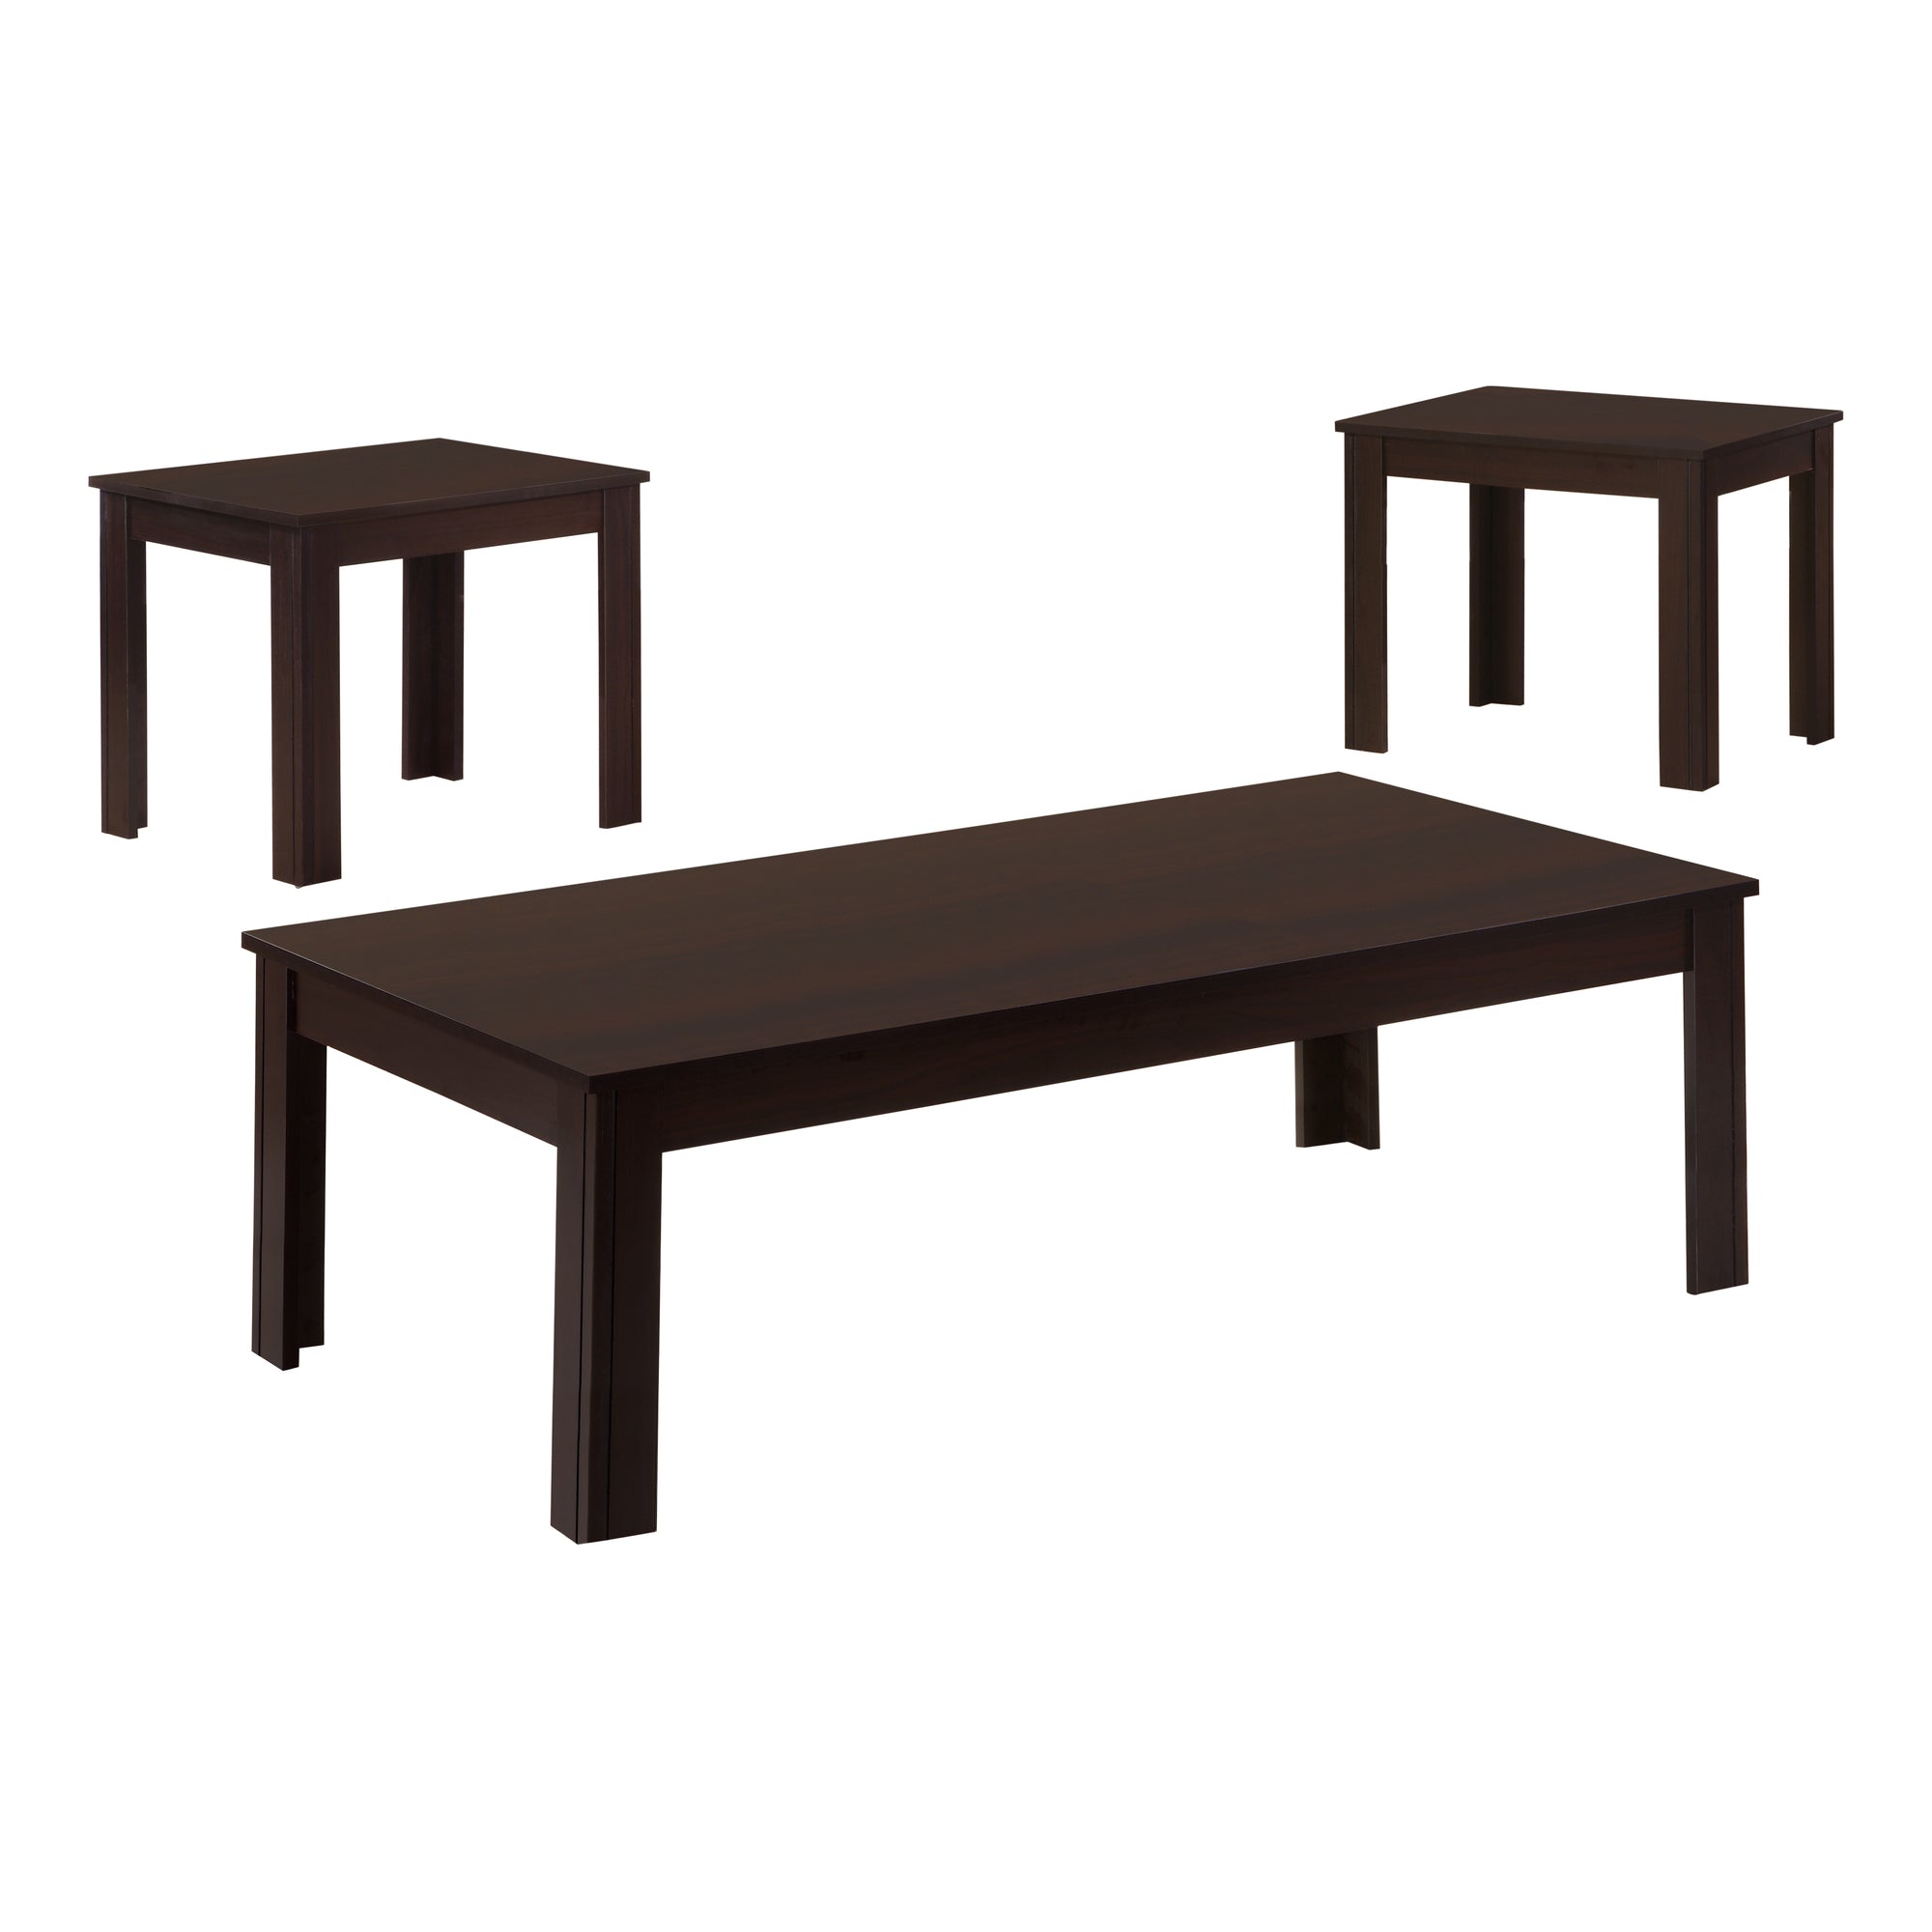 MN-507842P    Table Set, 3Pcs Set, Coffee, End, Side, Accent, Living Room, Laminate, Laminate, Dark Brown, Contemporary, Modern